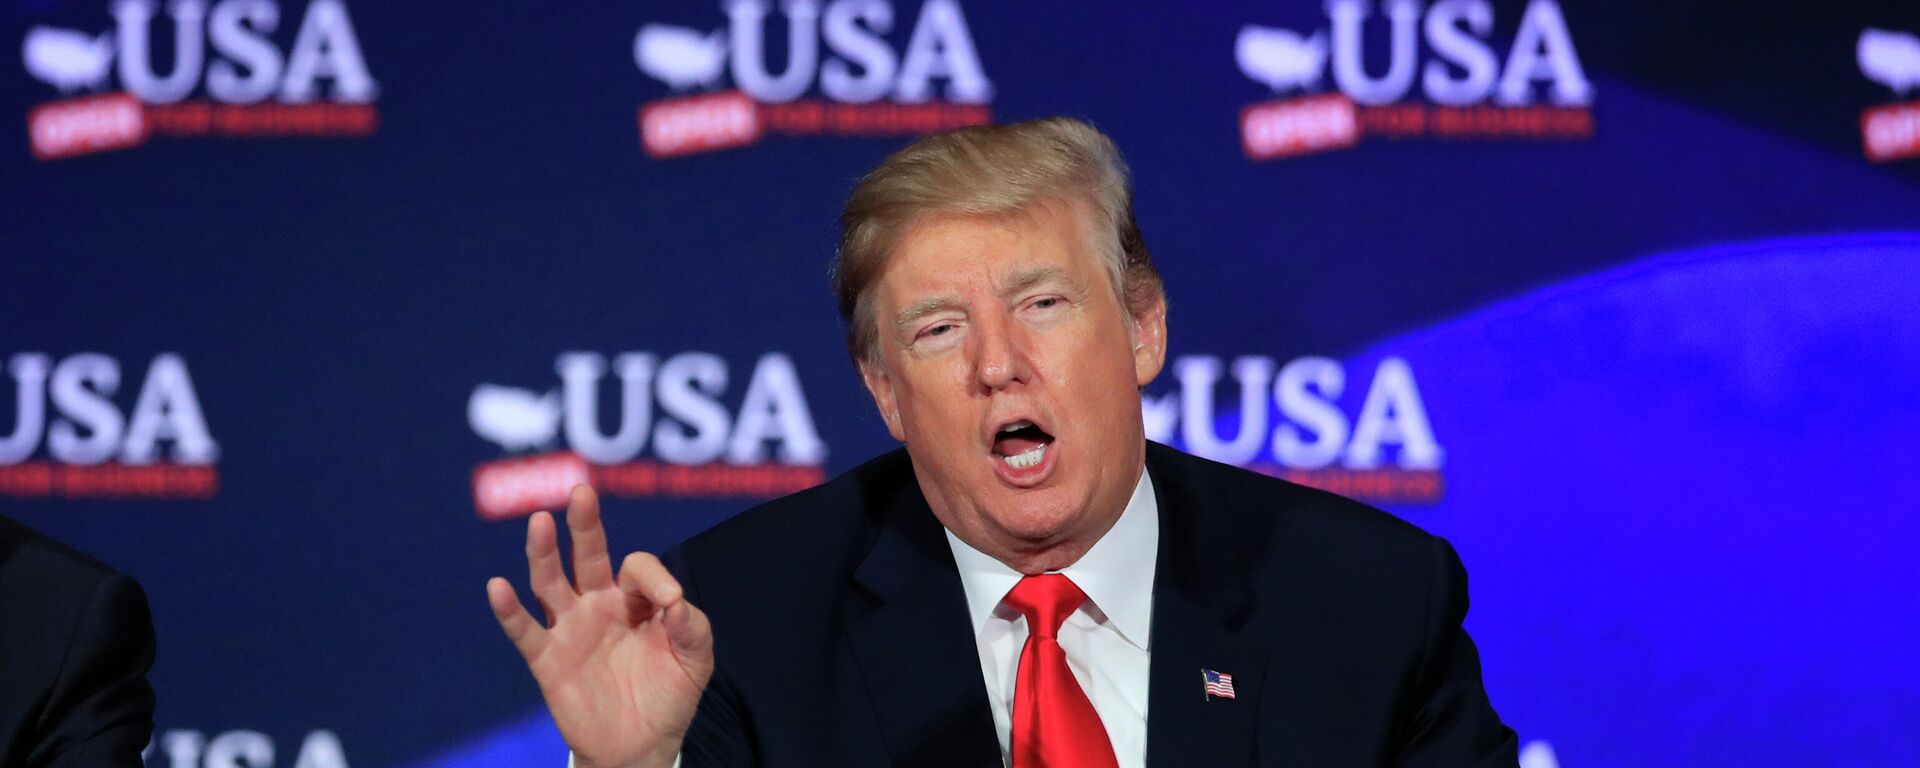  In this May 5, 2018 file photo, President Donald Trump speaks during a roundtable discussion on tax reform at Cleveland Public Auditorium and Conference Center in Cleveland, Ohio. - Sputnik International, 1920, 14.11.2021